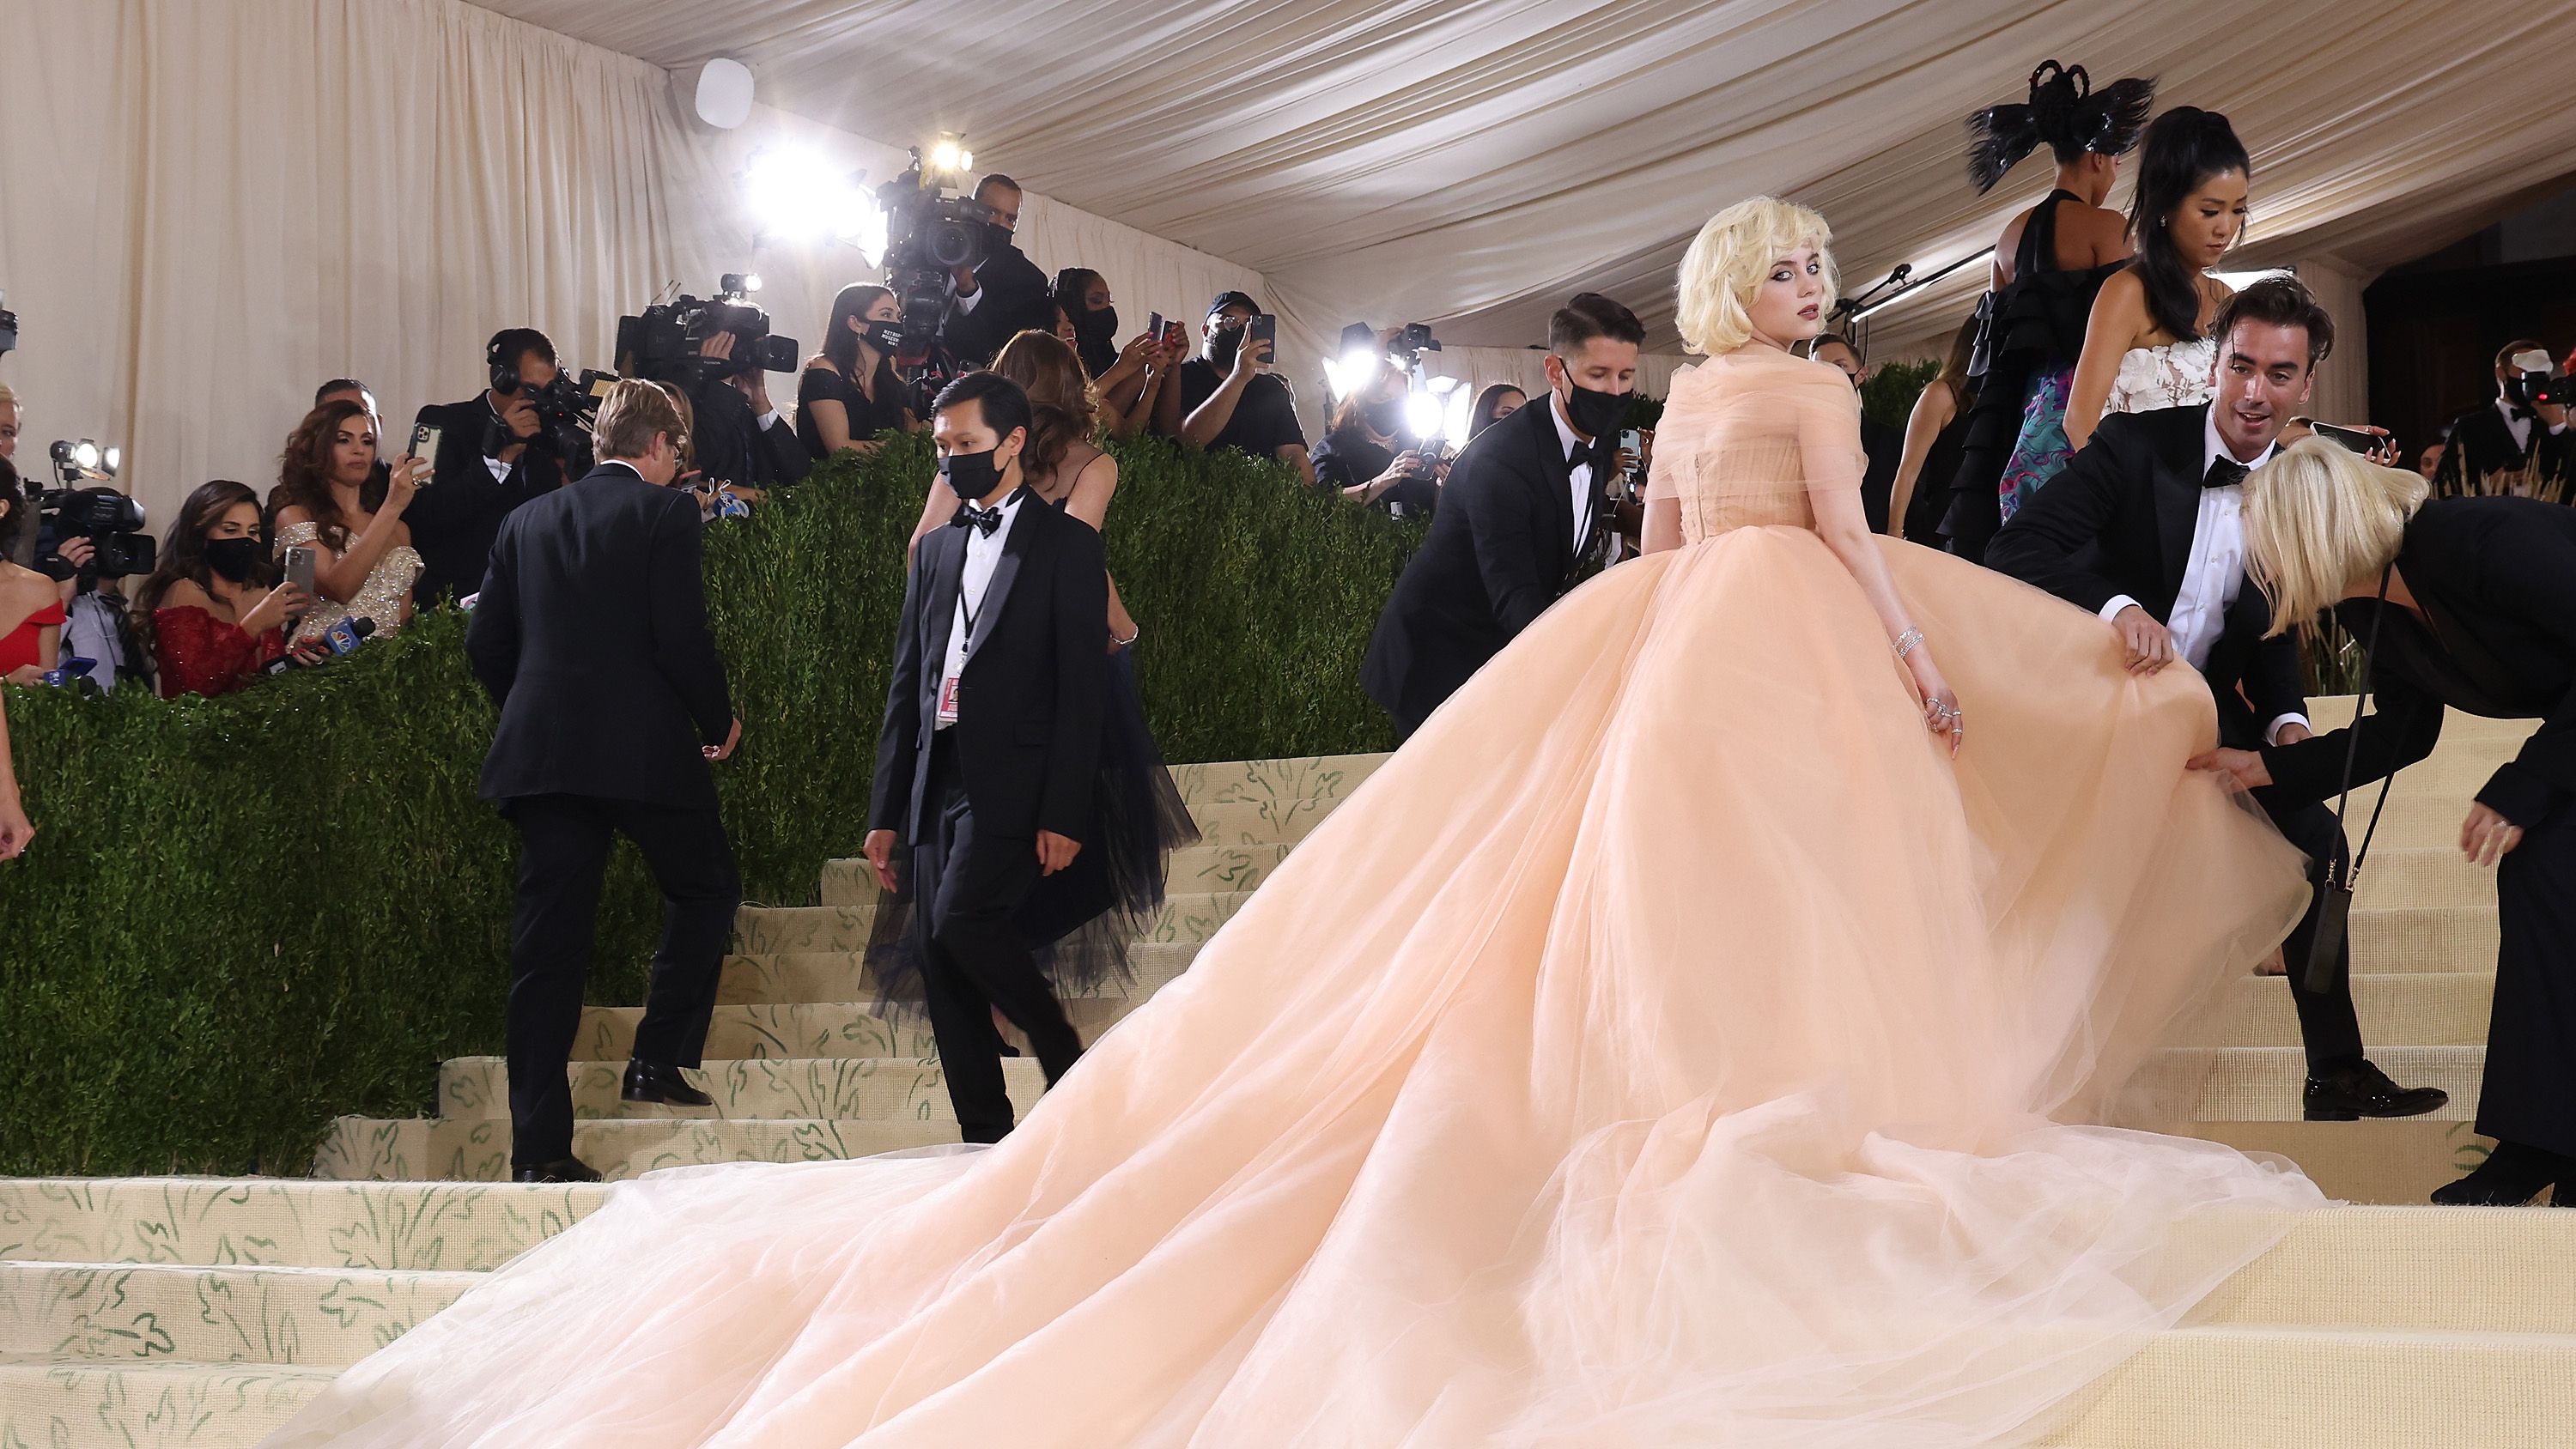 Met Gala 2022: The Theme, Date, Hosts, Attendees & Everything You Need To  Know